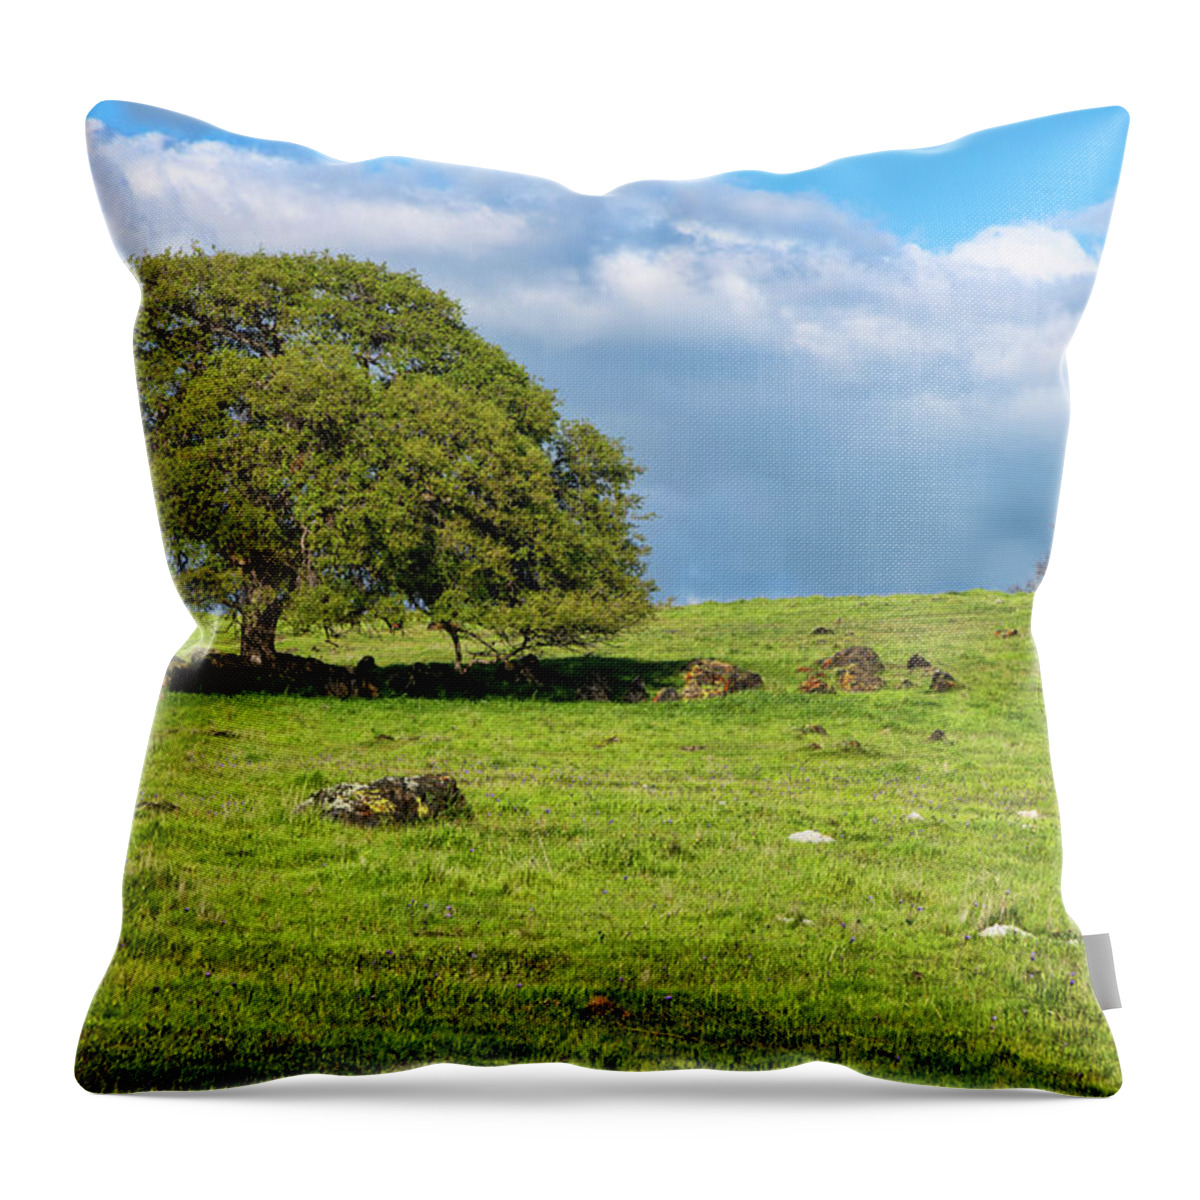 Cattle Throw Pillow featuring the photograph Lonely Steer by Dan McGeorge